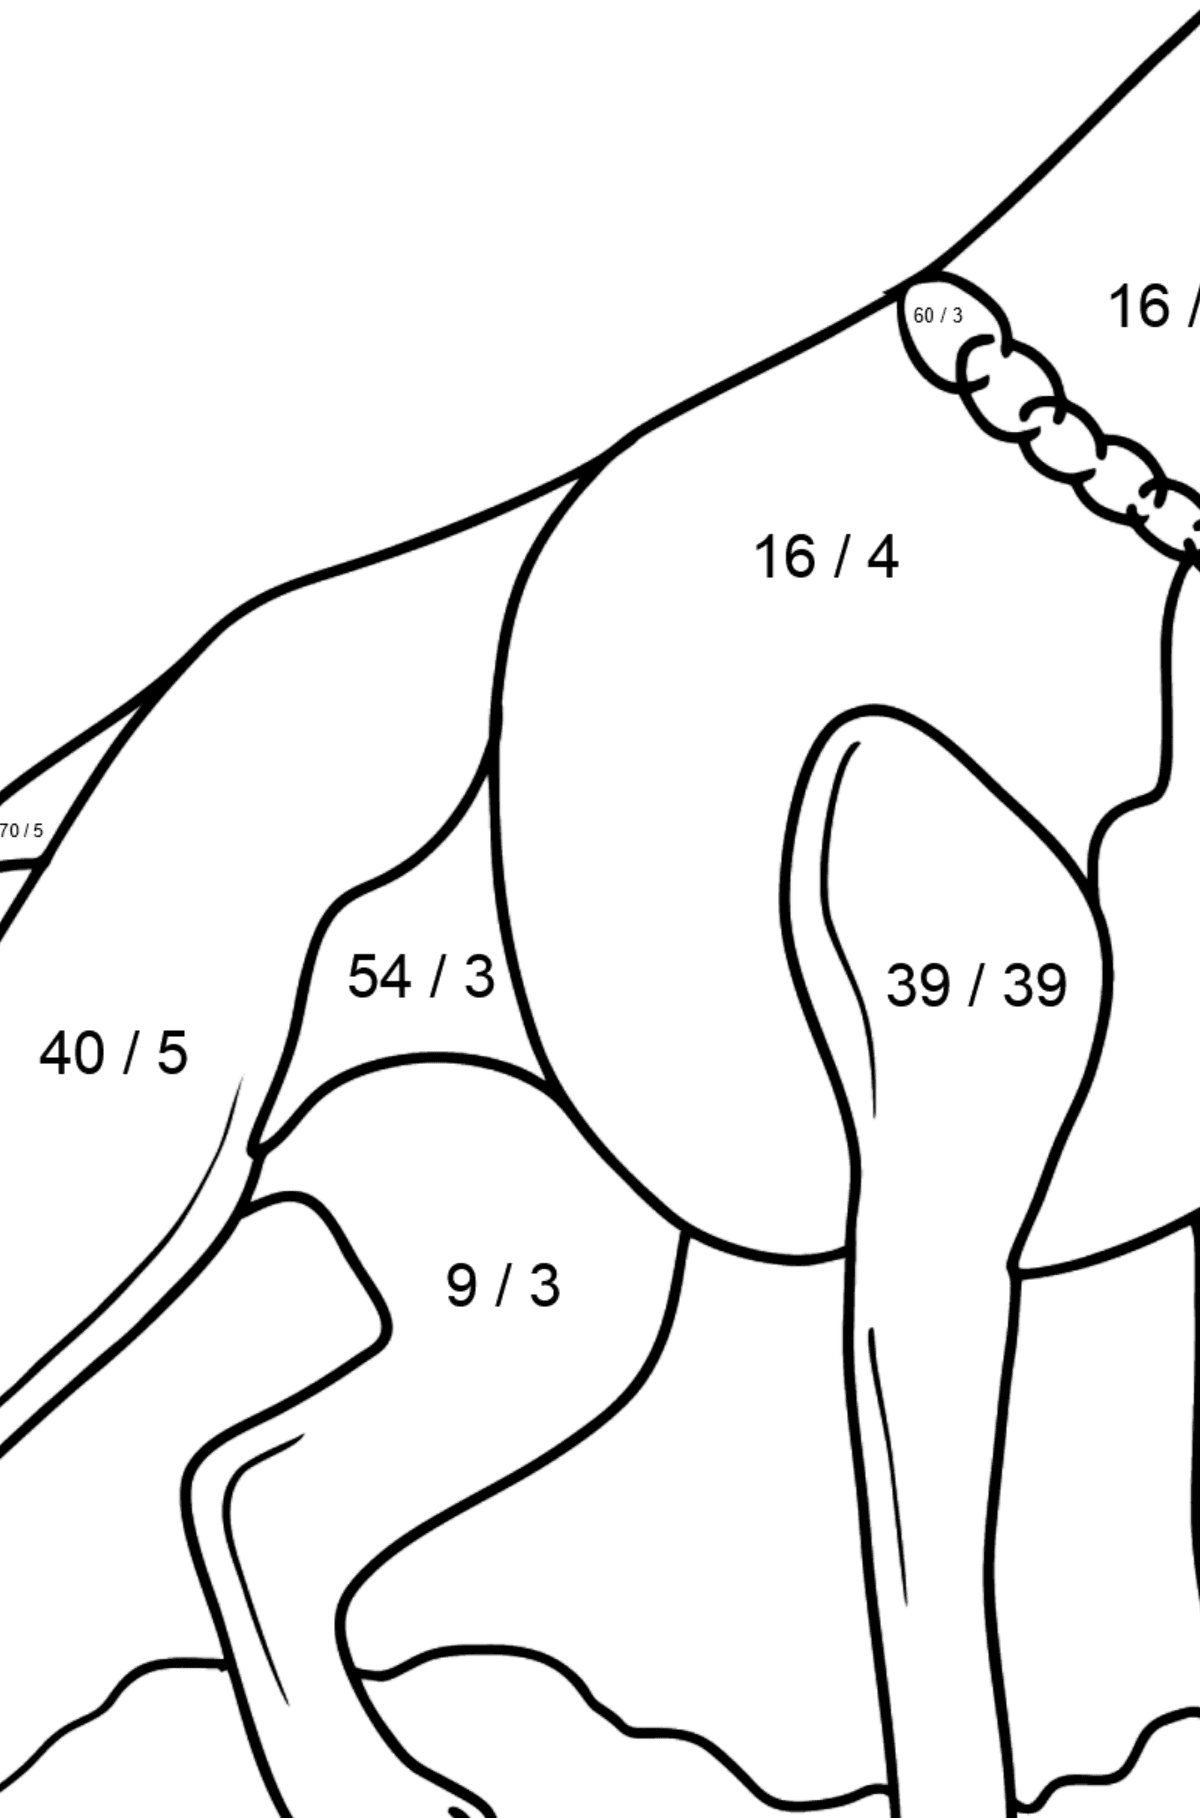 Boxer Dog coloring page - Math Coloring - Division for Kids